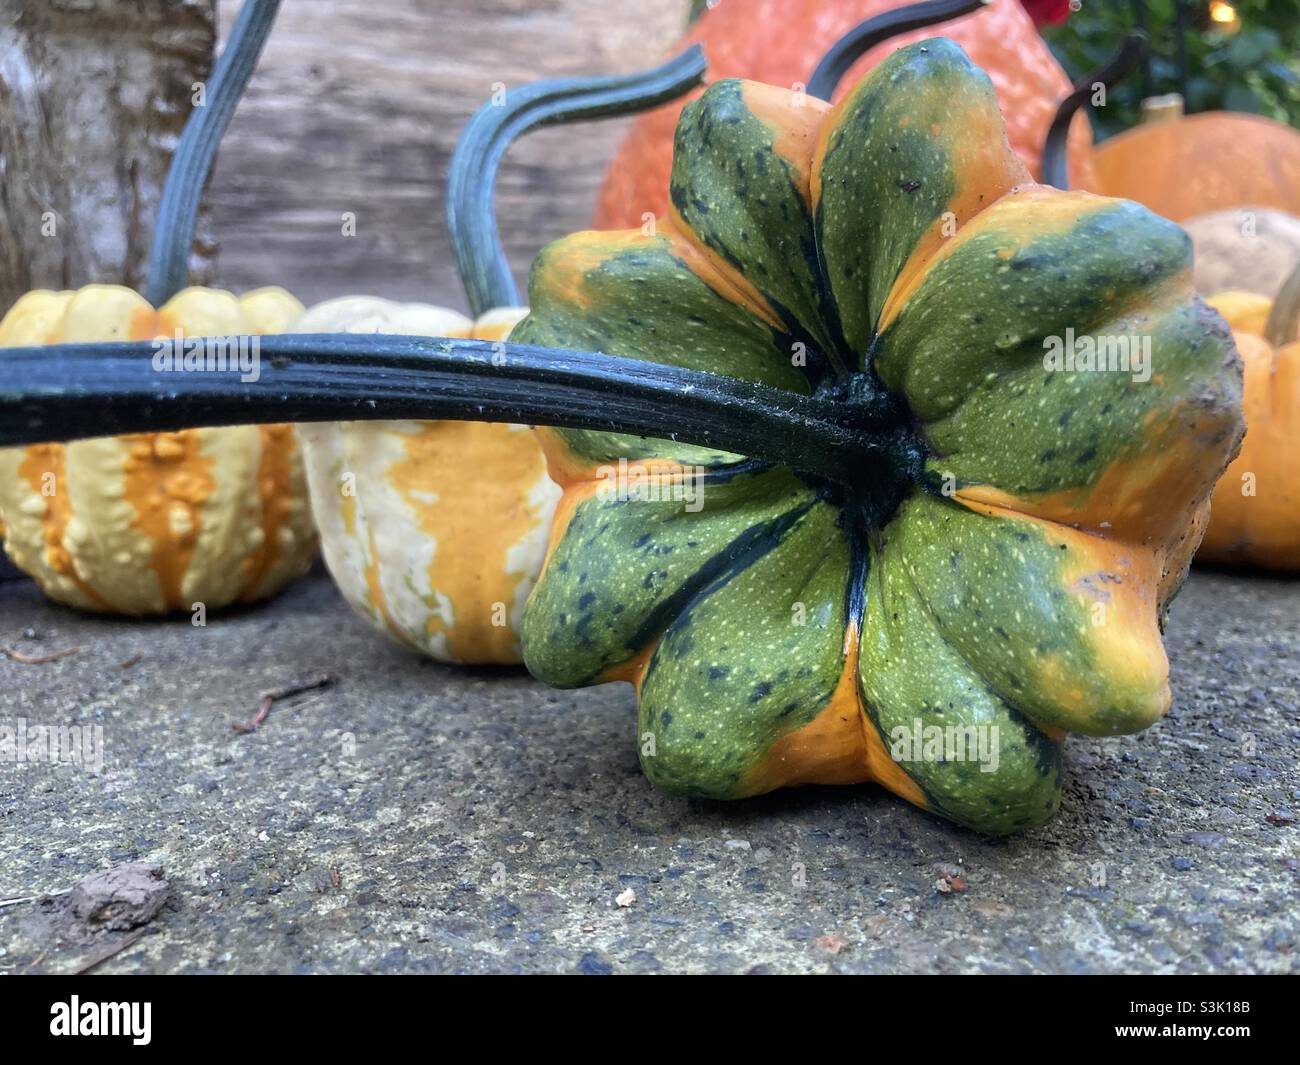 Green and orange gourd with a long stem. Stock Photo